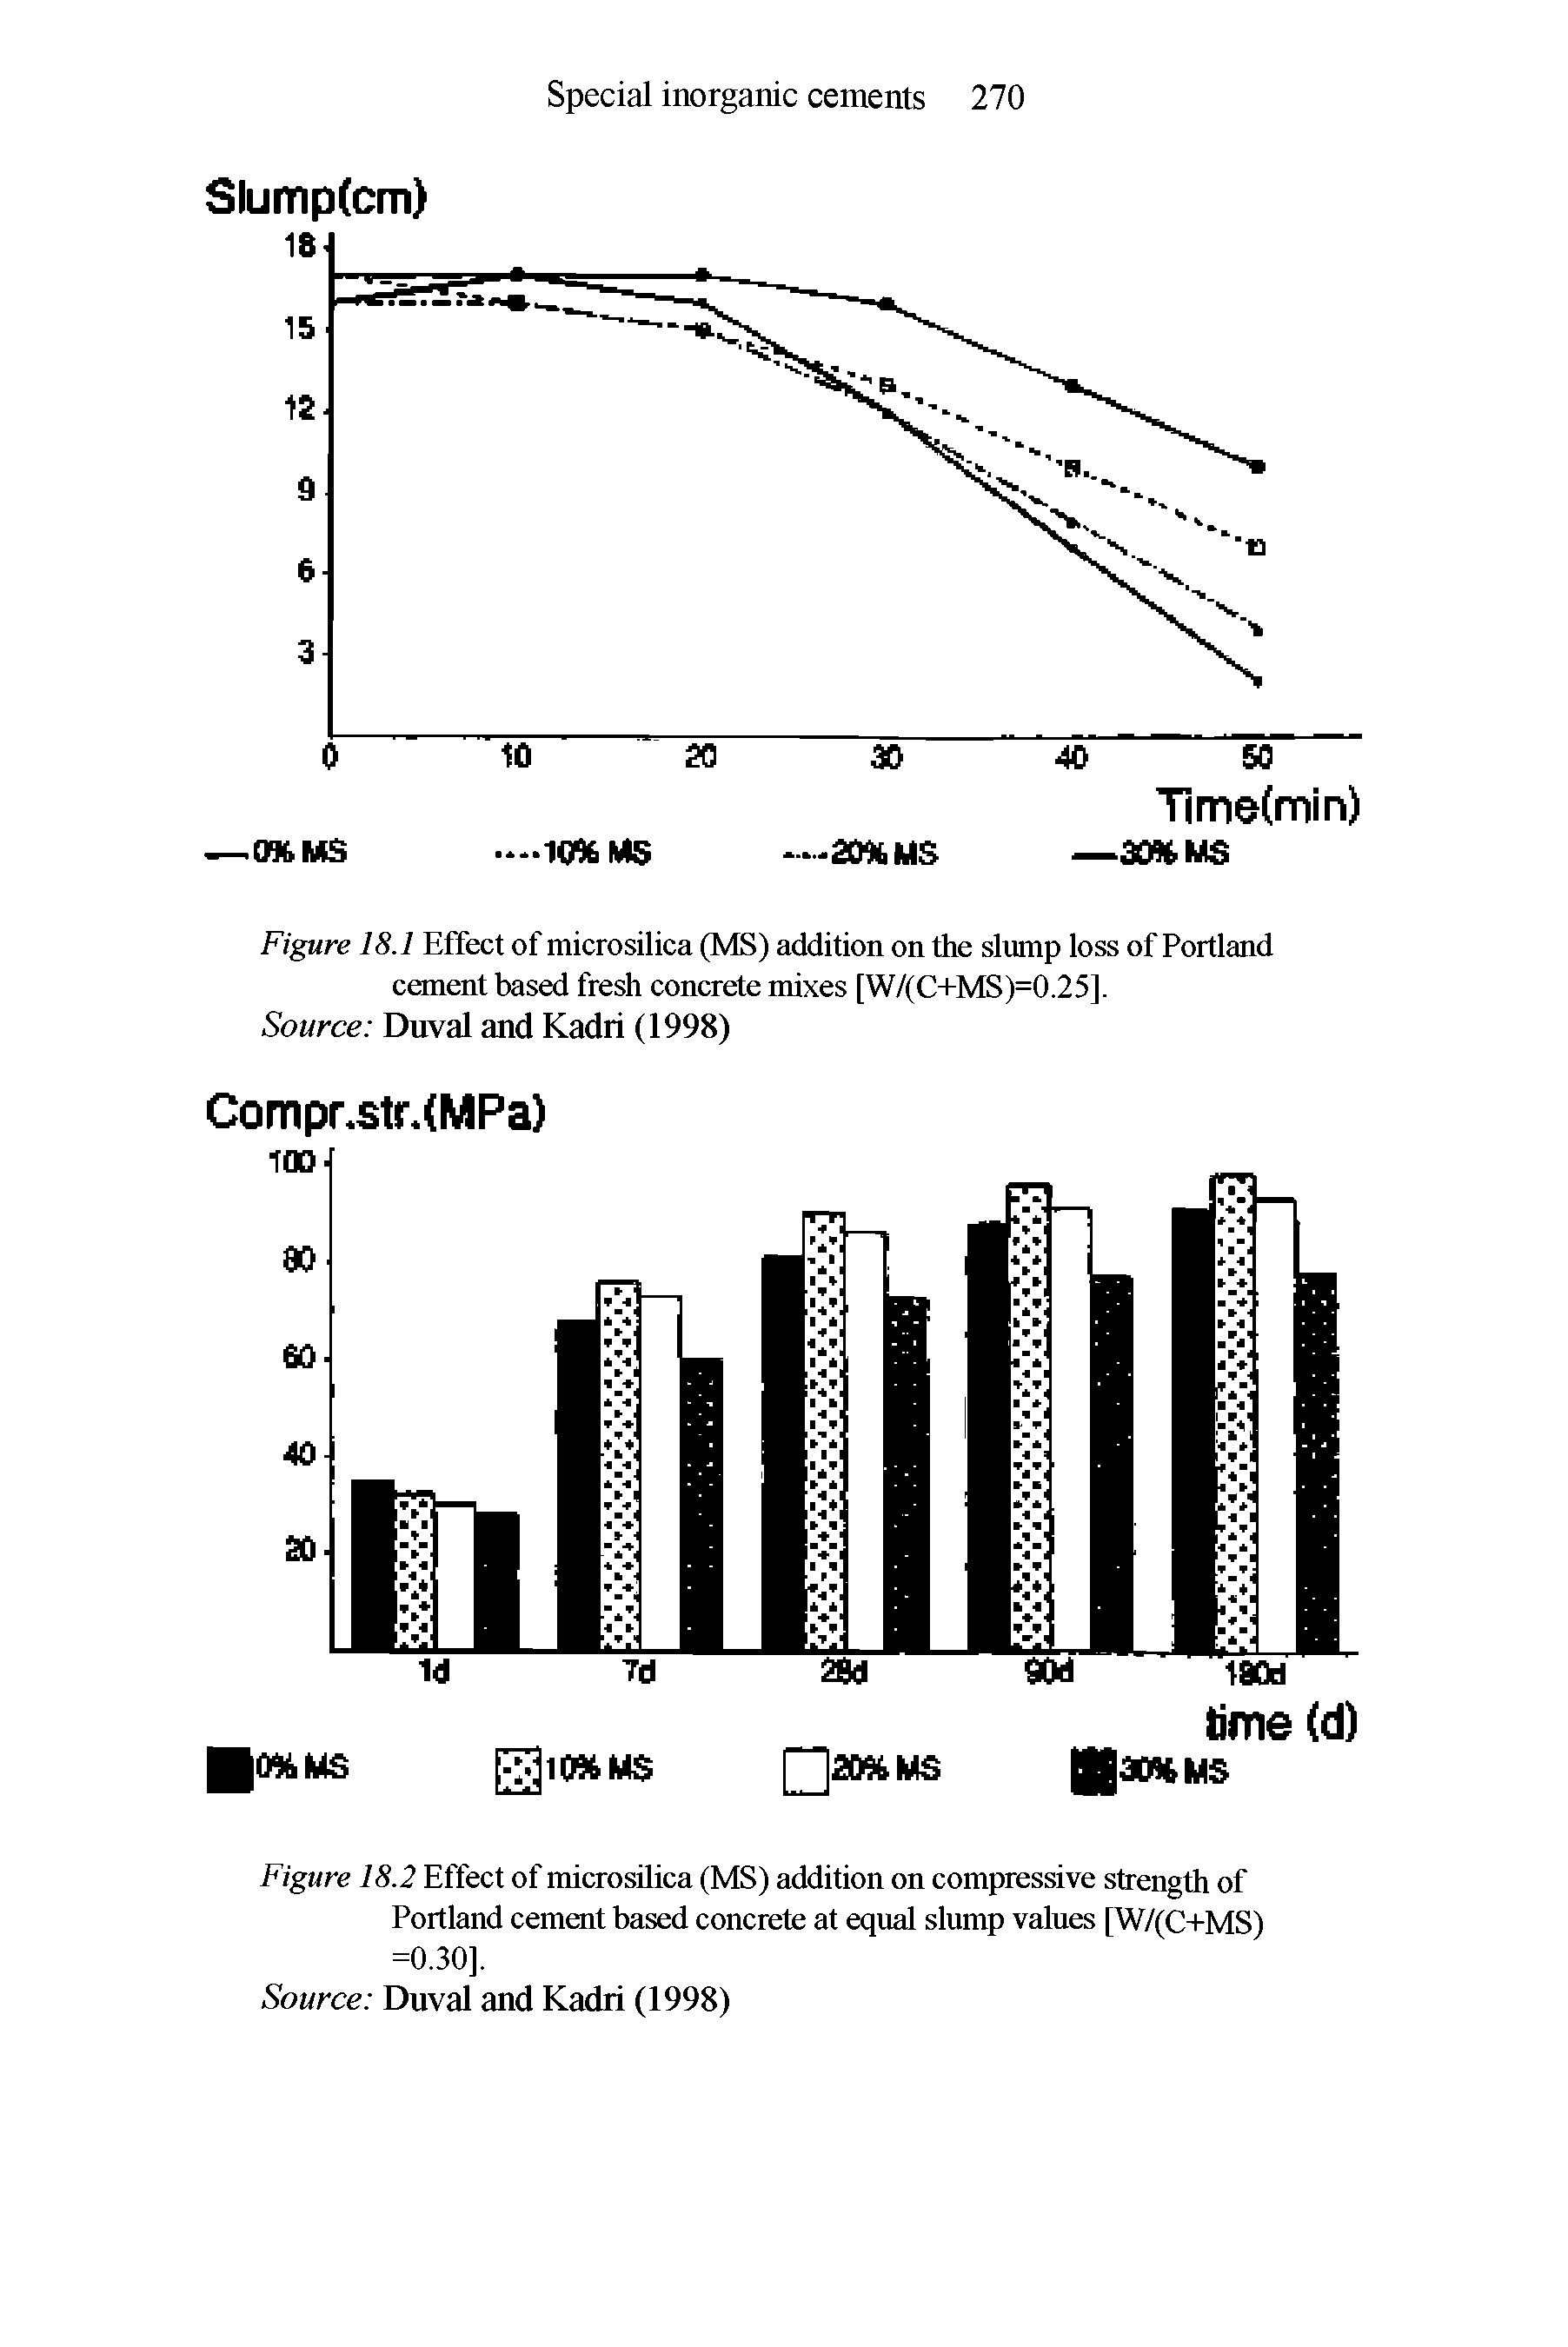 Figure 18.2 Effect of microsilica (MS) addition on compressive strength of Portland cement based concrete at equal slump values [W/(C+MS) =0.30].